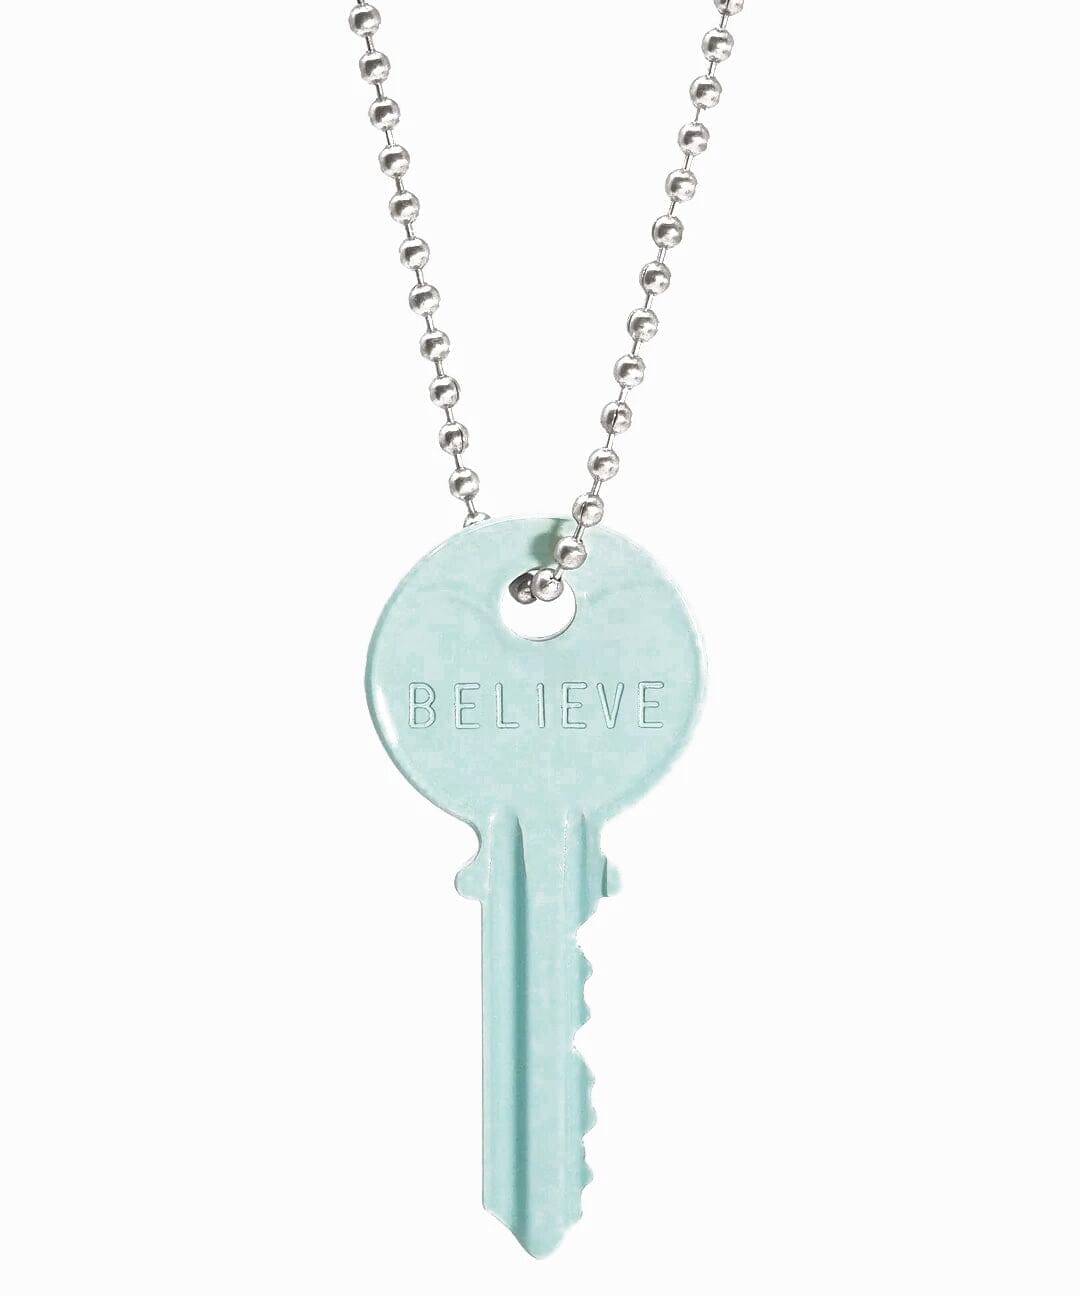 N - Pastel Green Classic Ball Chain Key Necklace Necklaces The Giving Keys Silver 